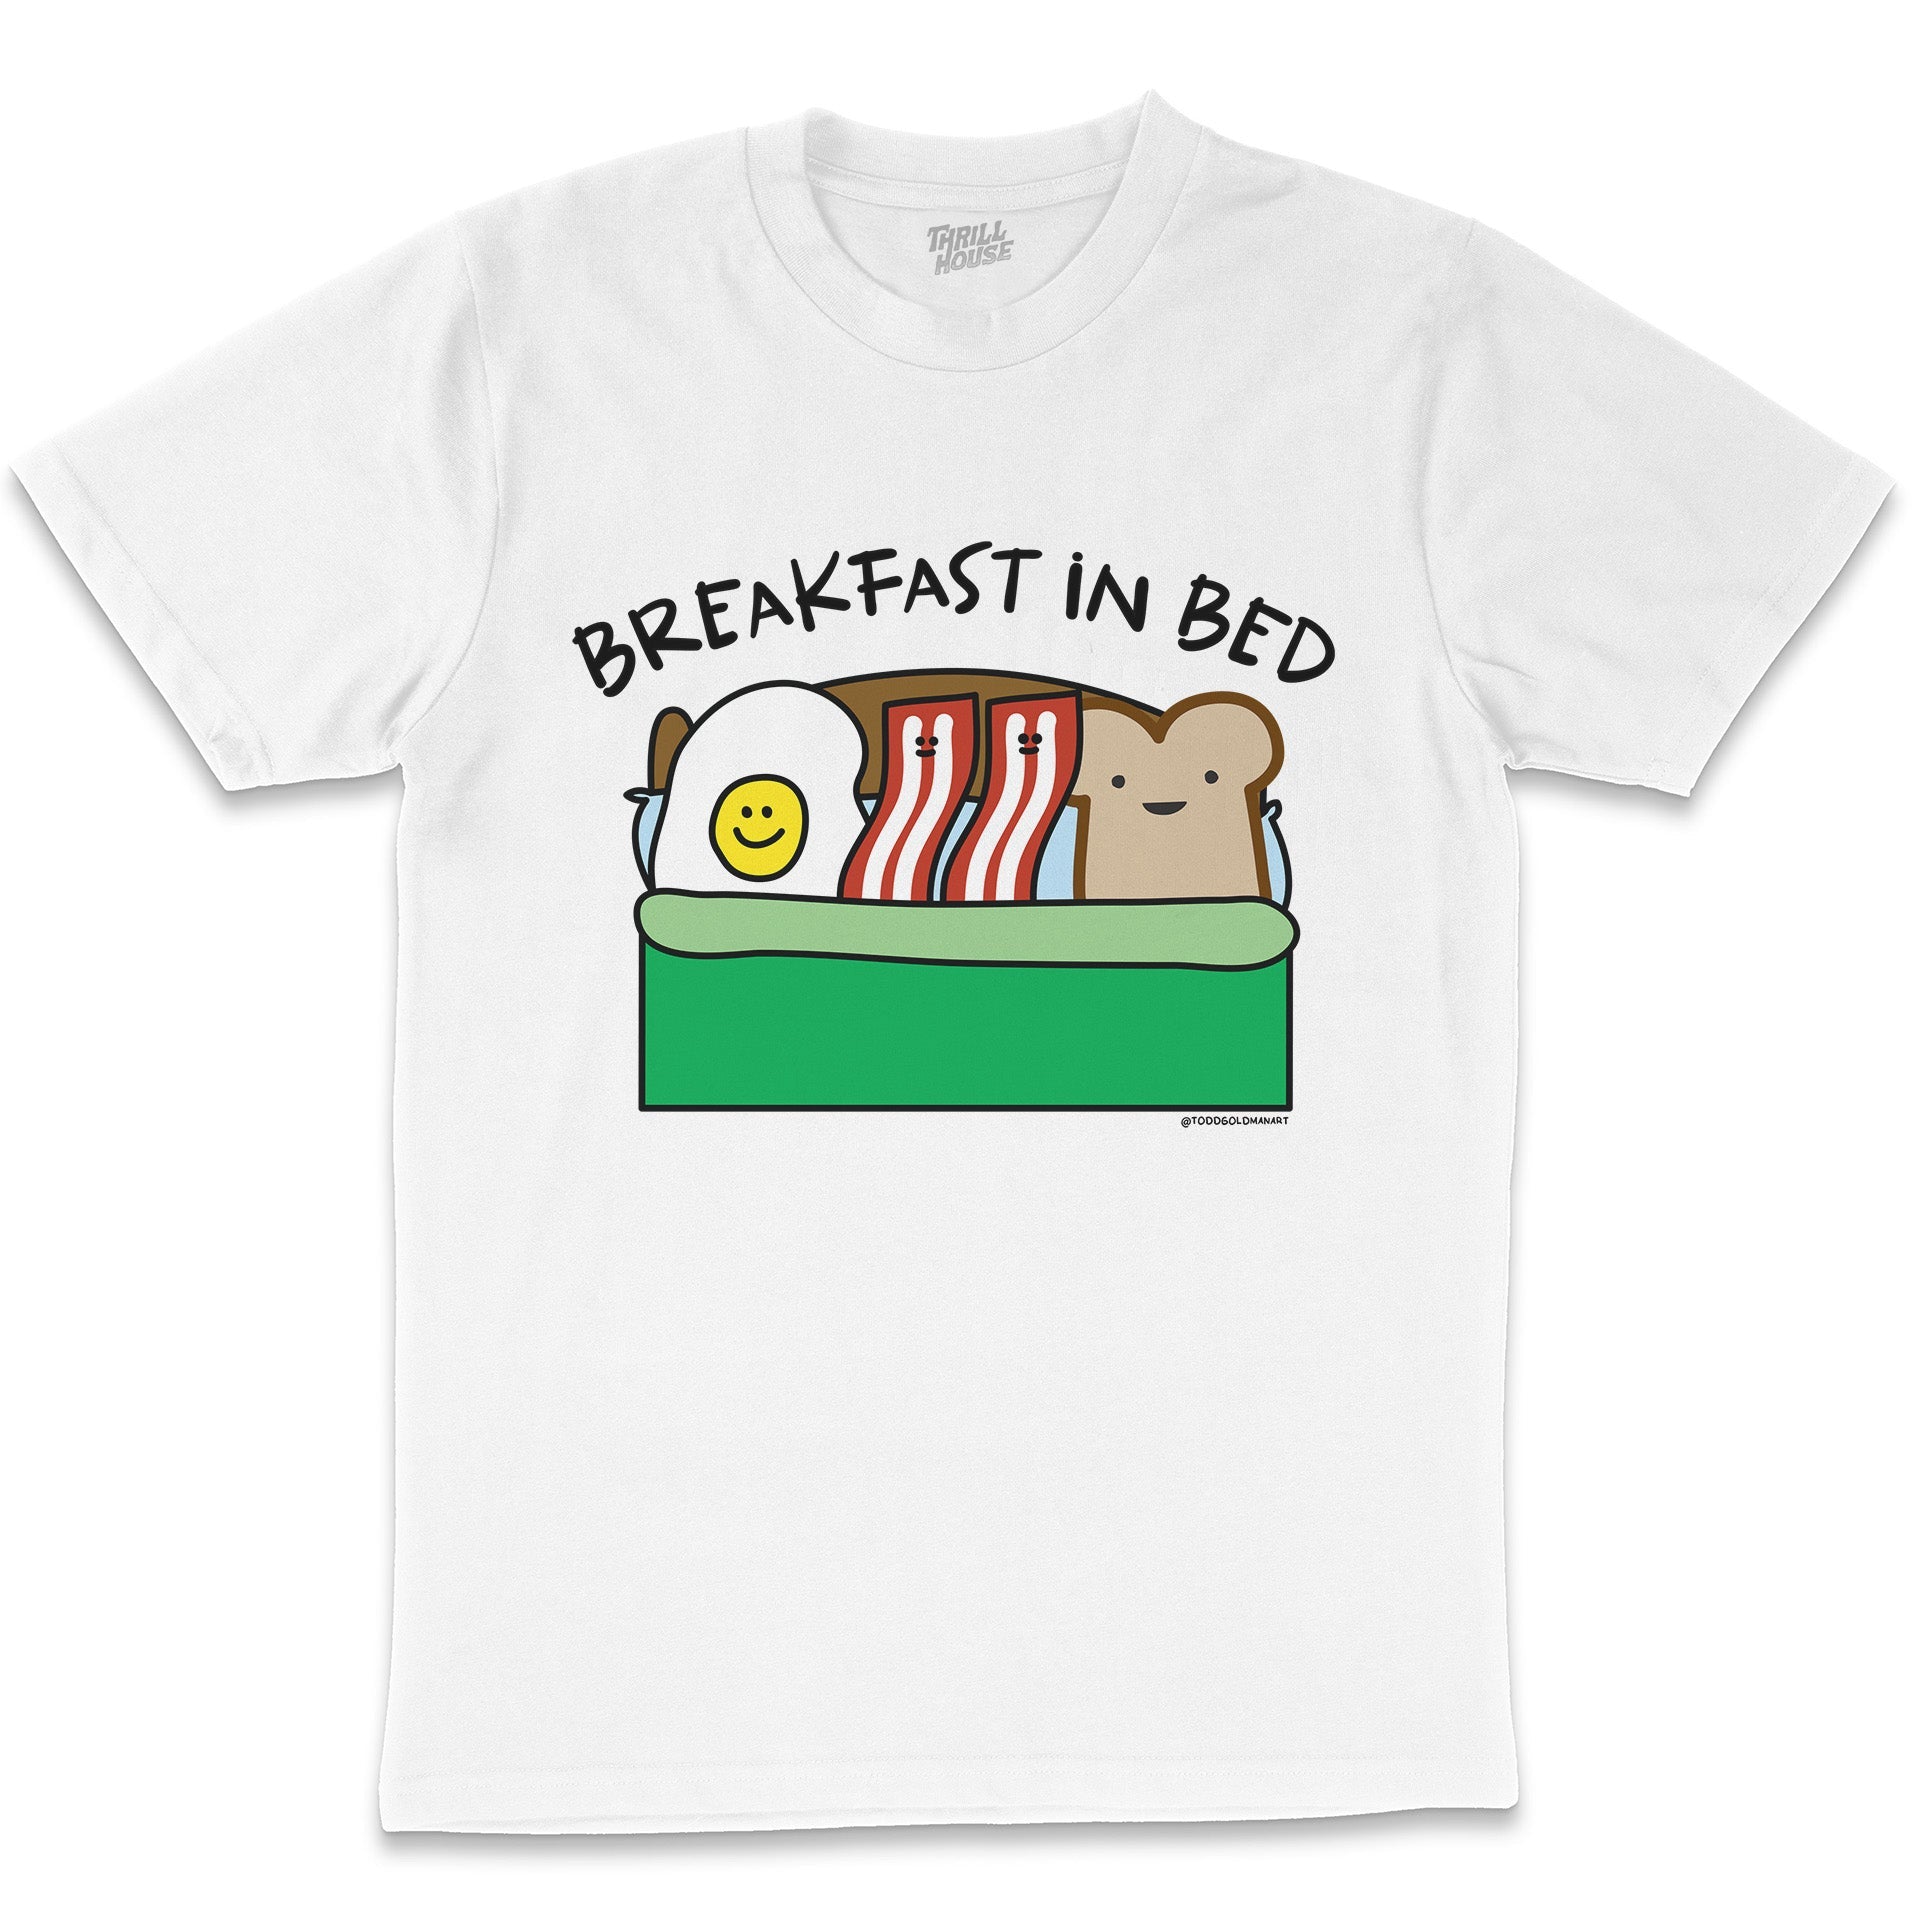 Breakfast in Bed Bacon Eggs Foodie Food Funny Parody Pun Cotton T-Shirt